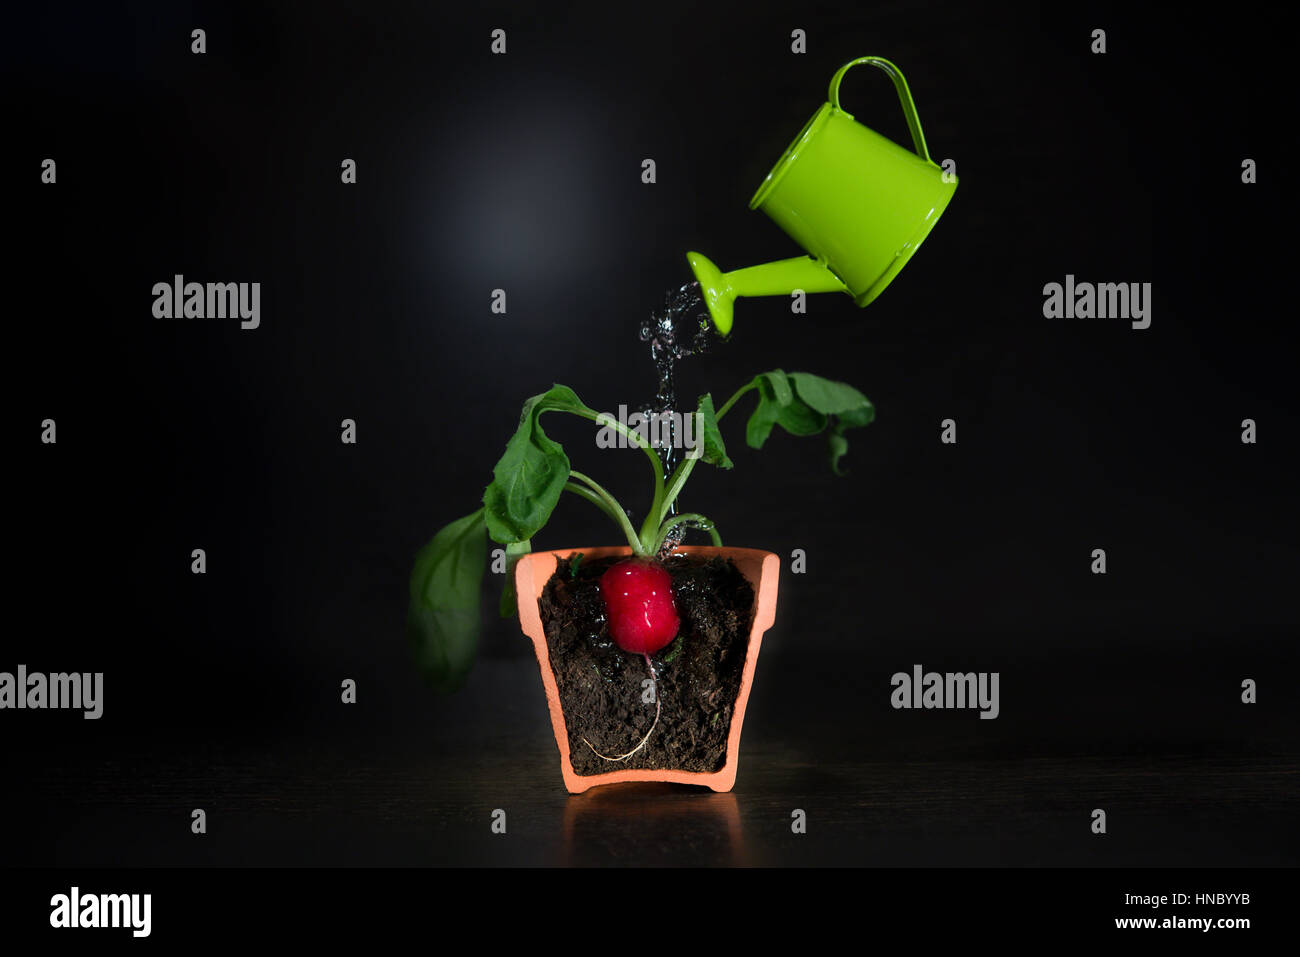 Watering can watering a radish in a plant pot Stock Photo